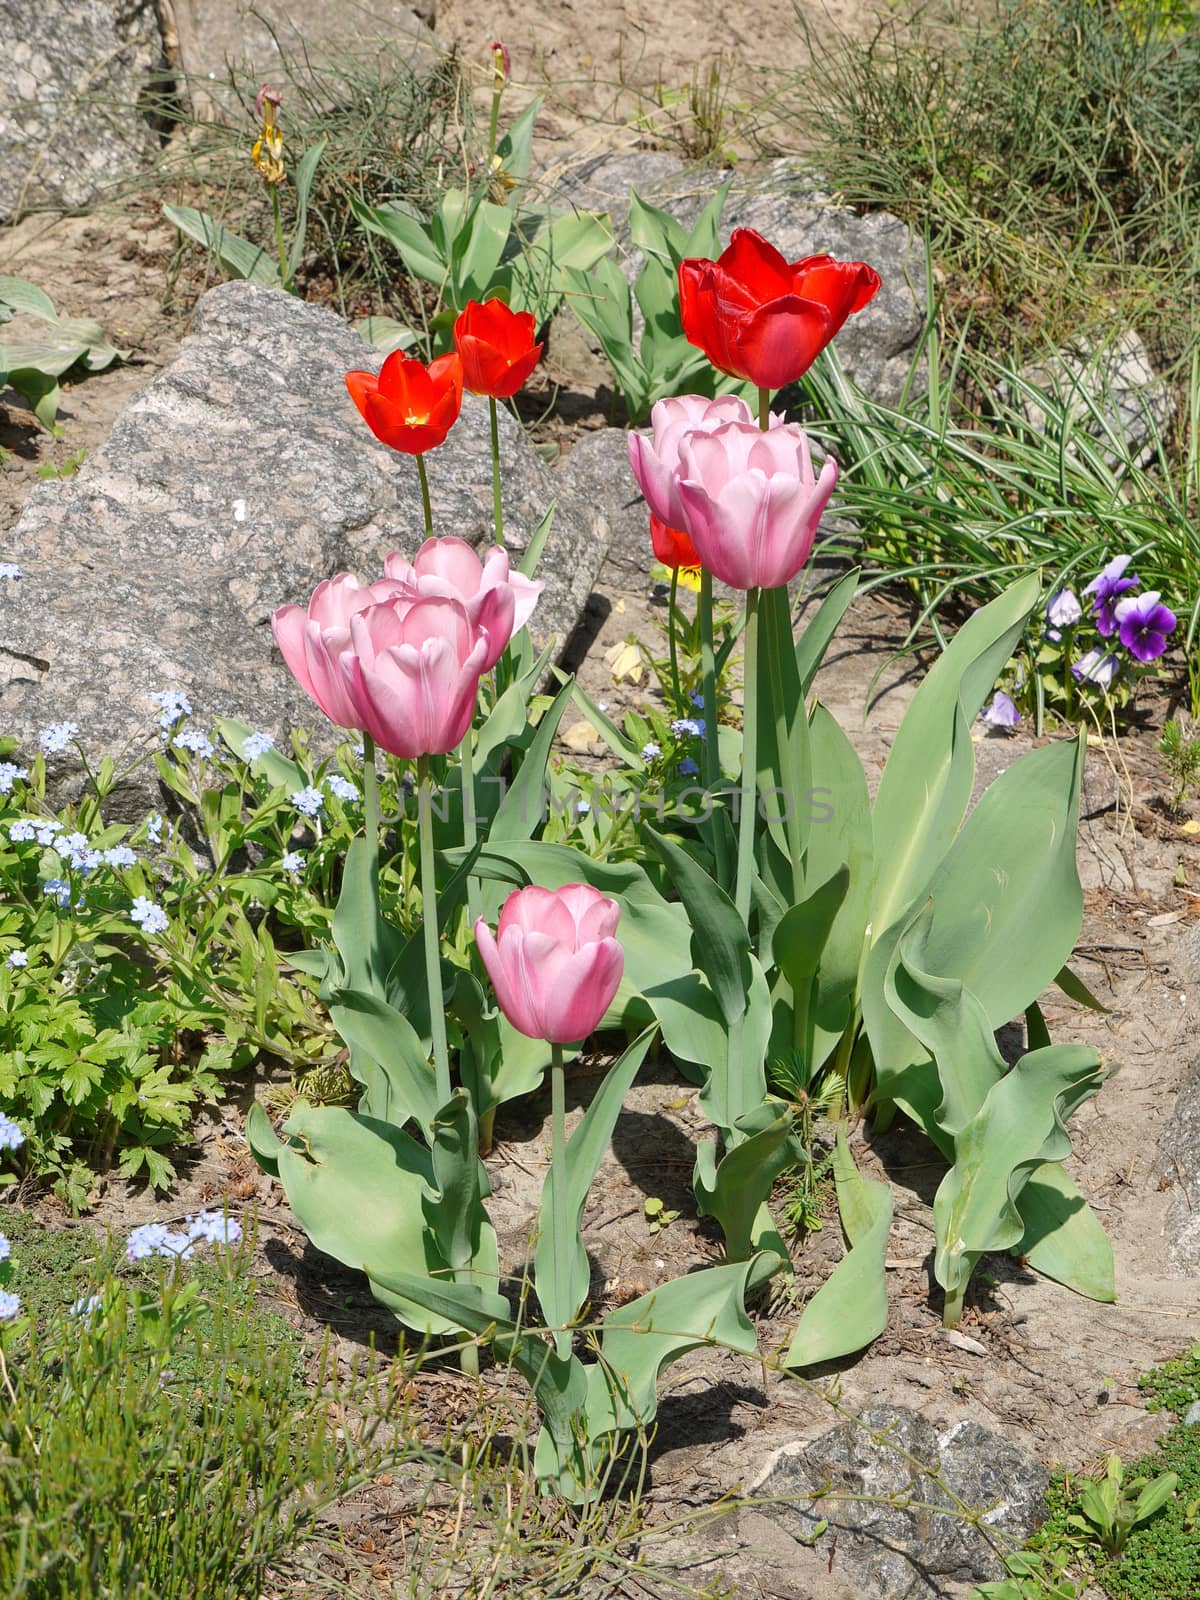 Graceful fresh with pink petals of tulips. Growing among small stones and grass under the scorching sun. by Adamchuk